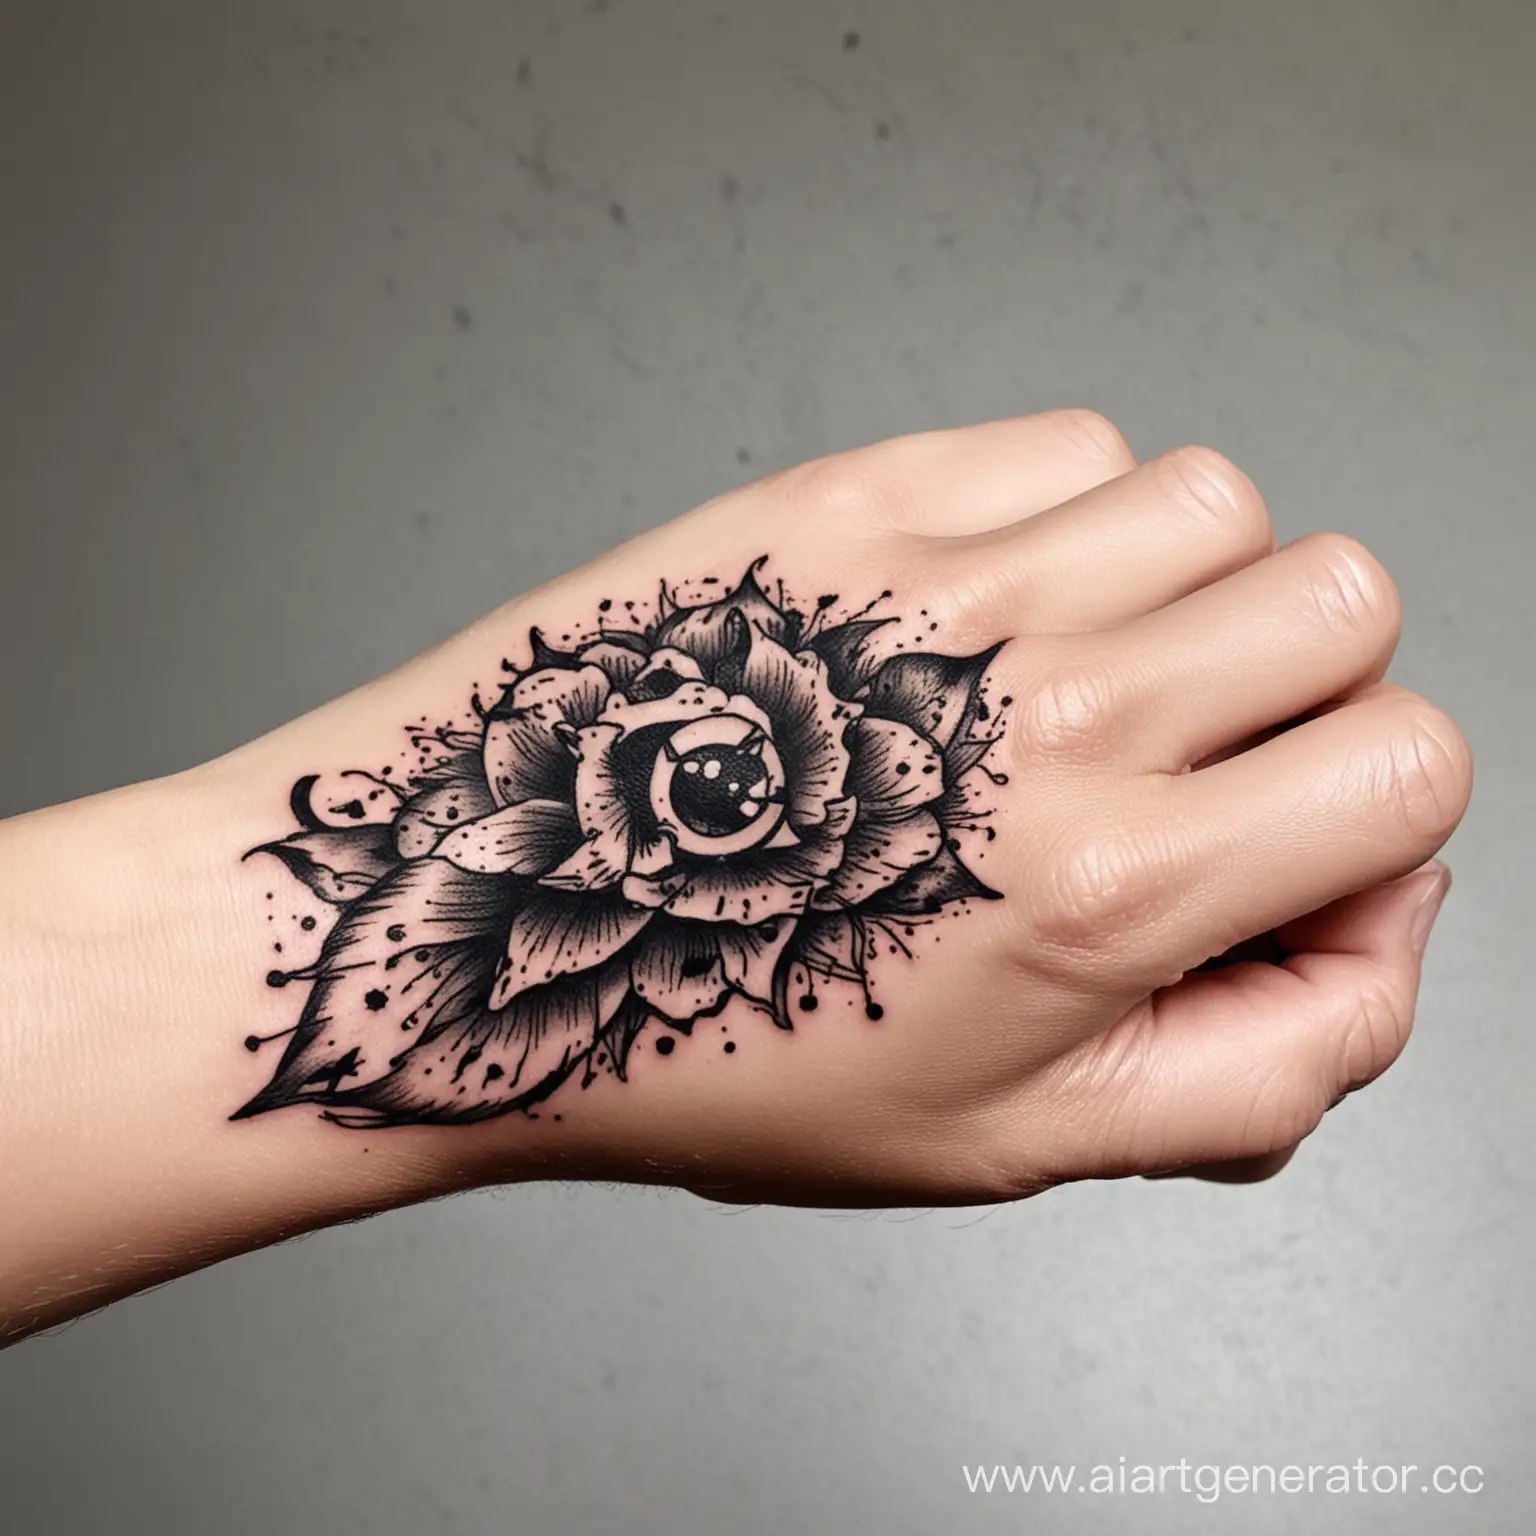 Colorful-Fist-Tattoo-with-Unconventional-Design